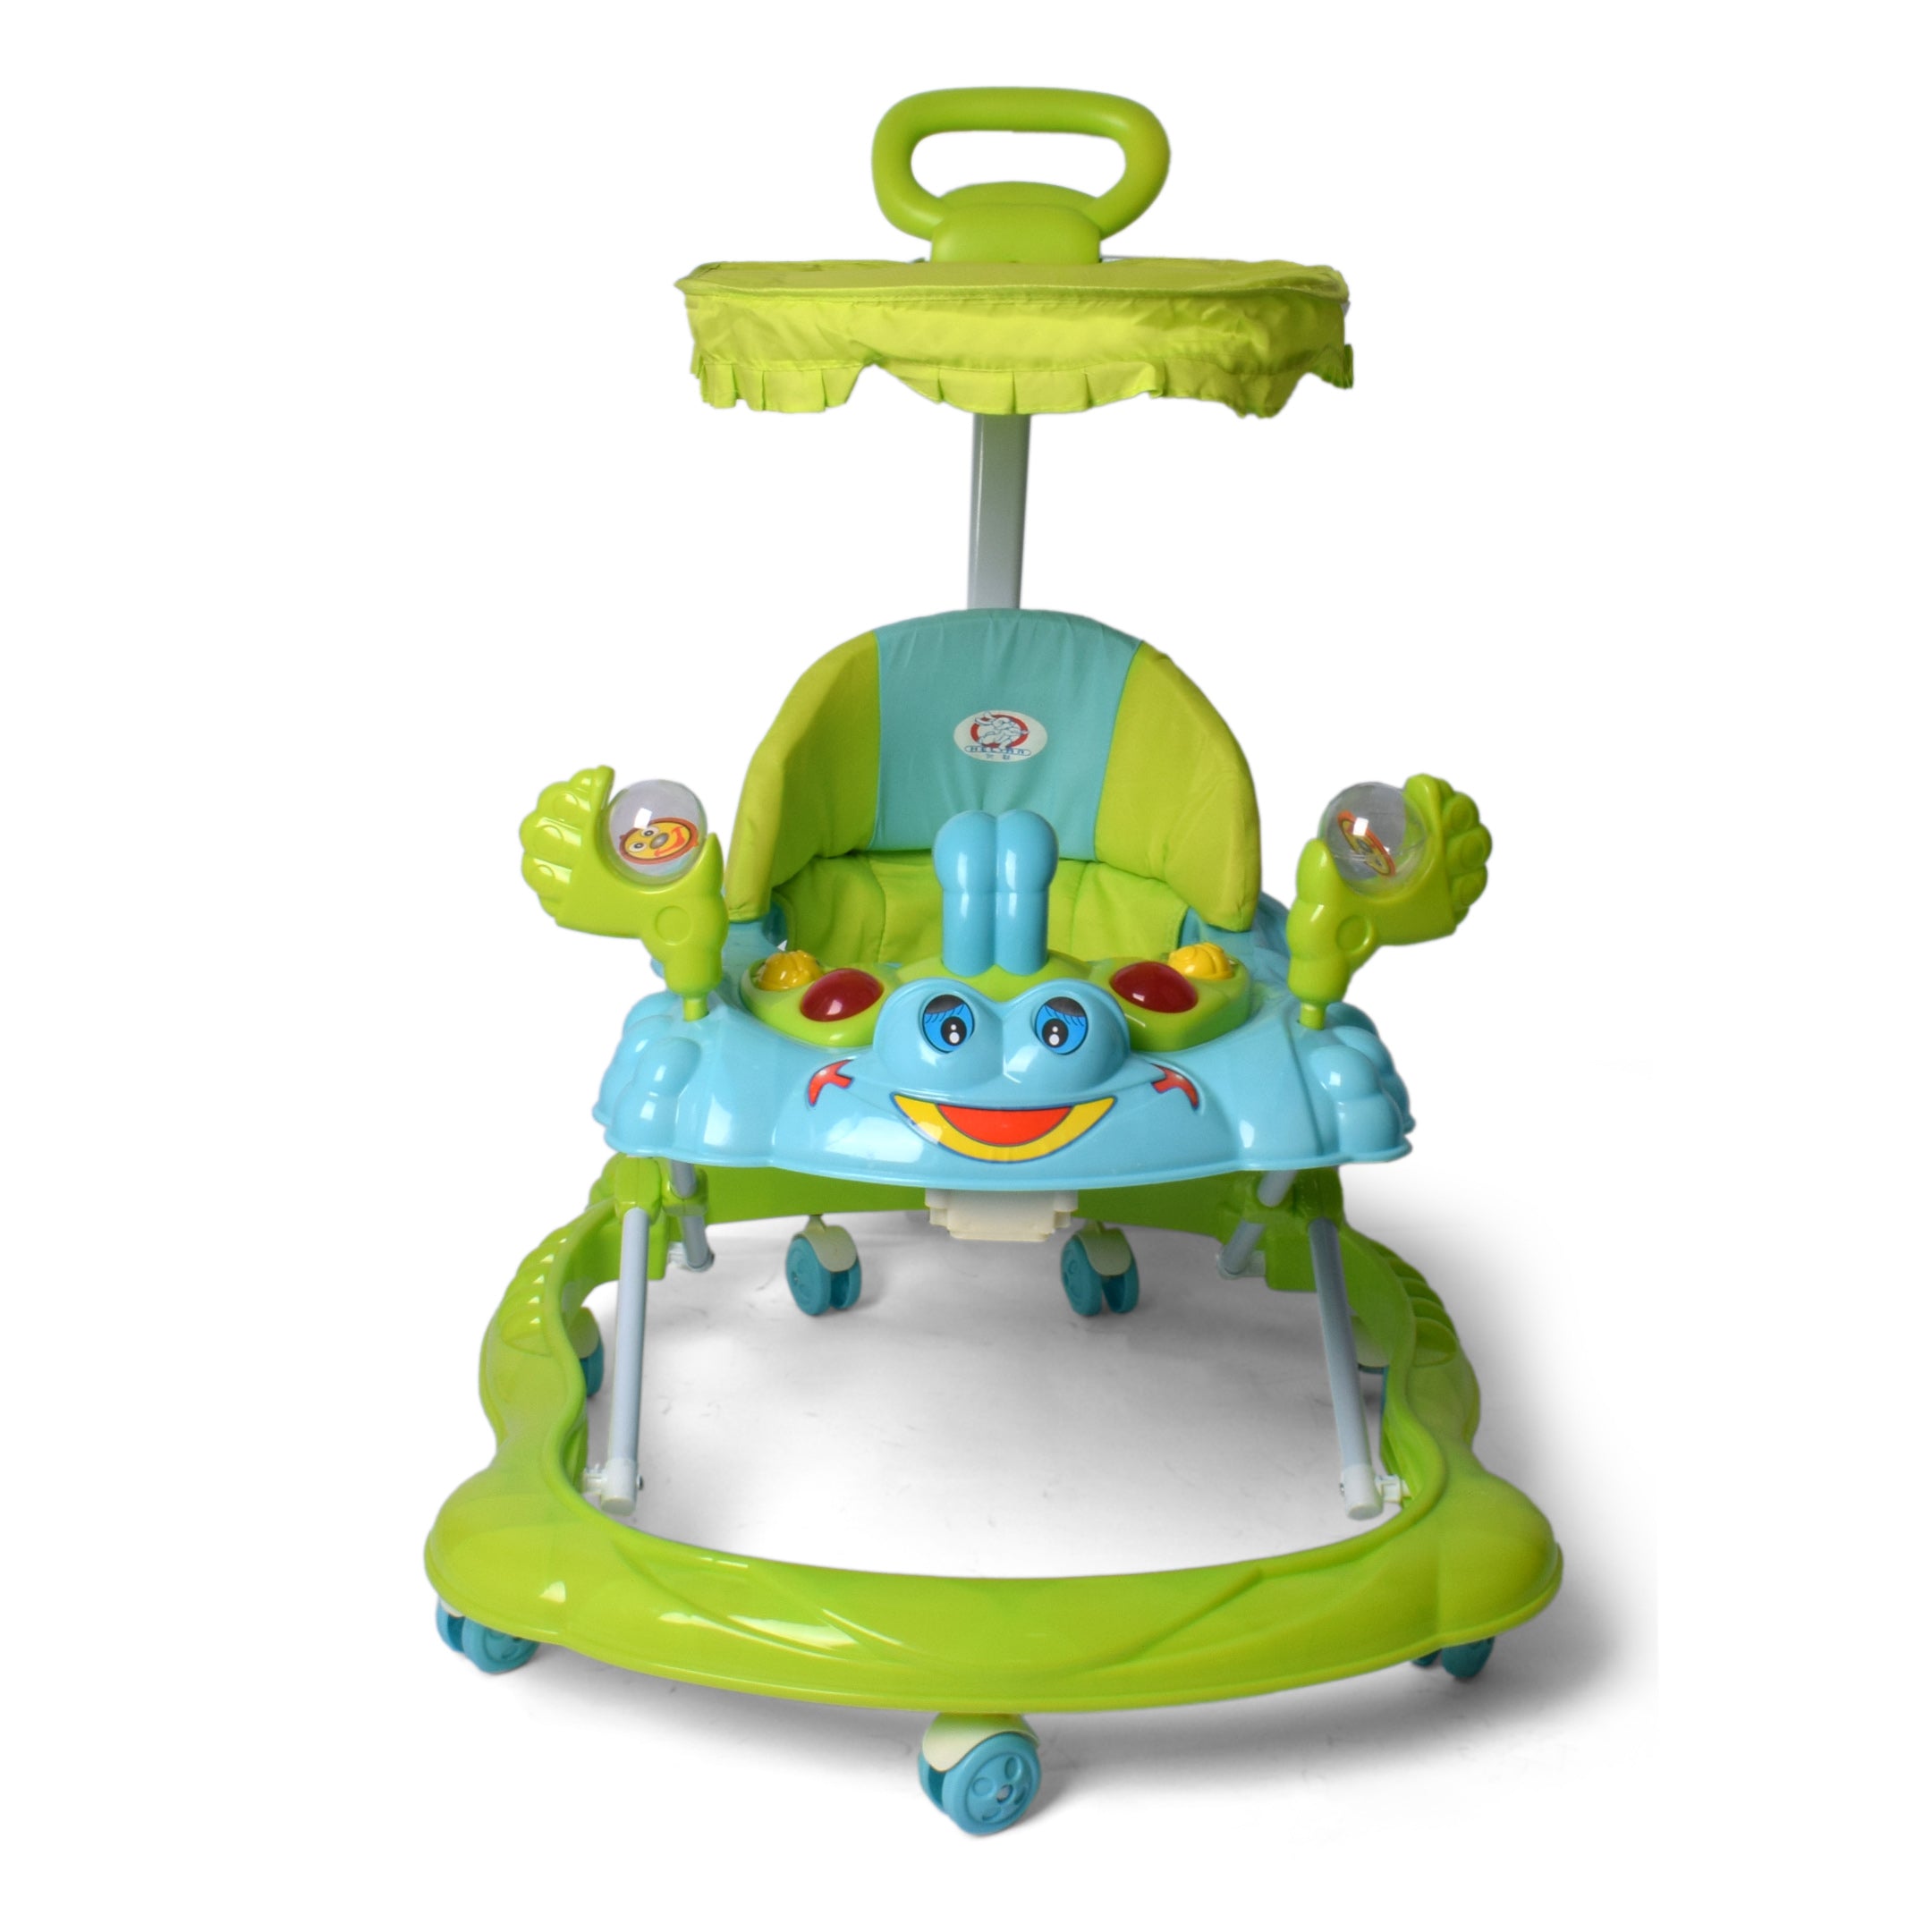 Baby Walker with Canopy & Push Bar - Green